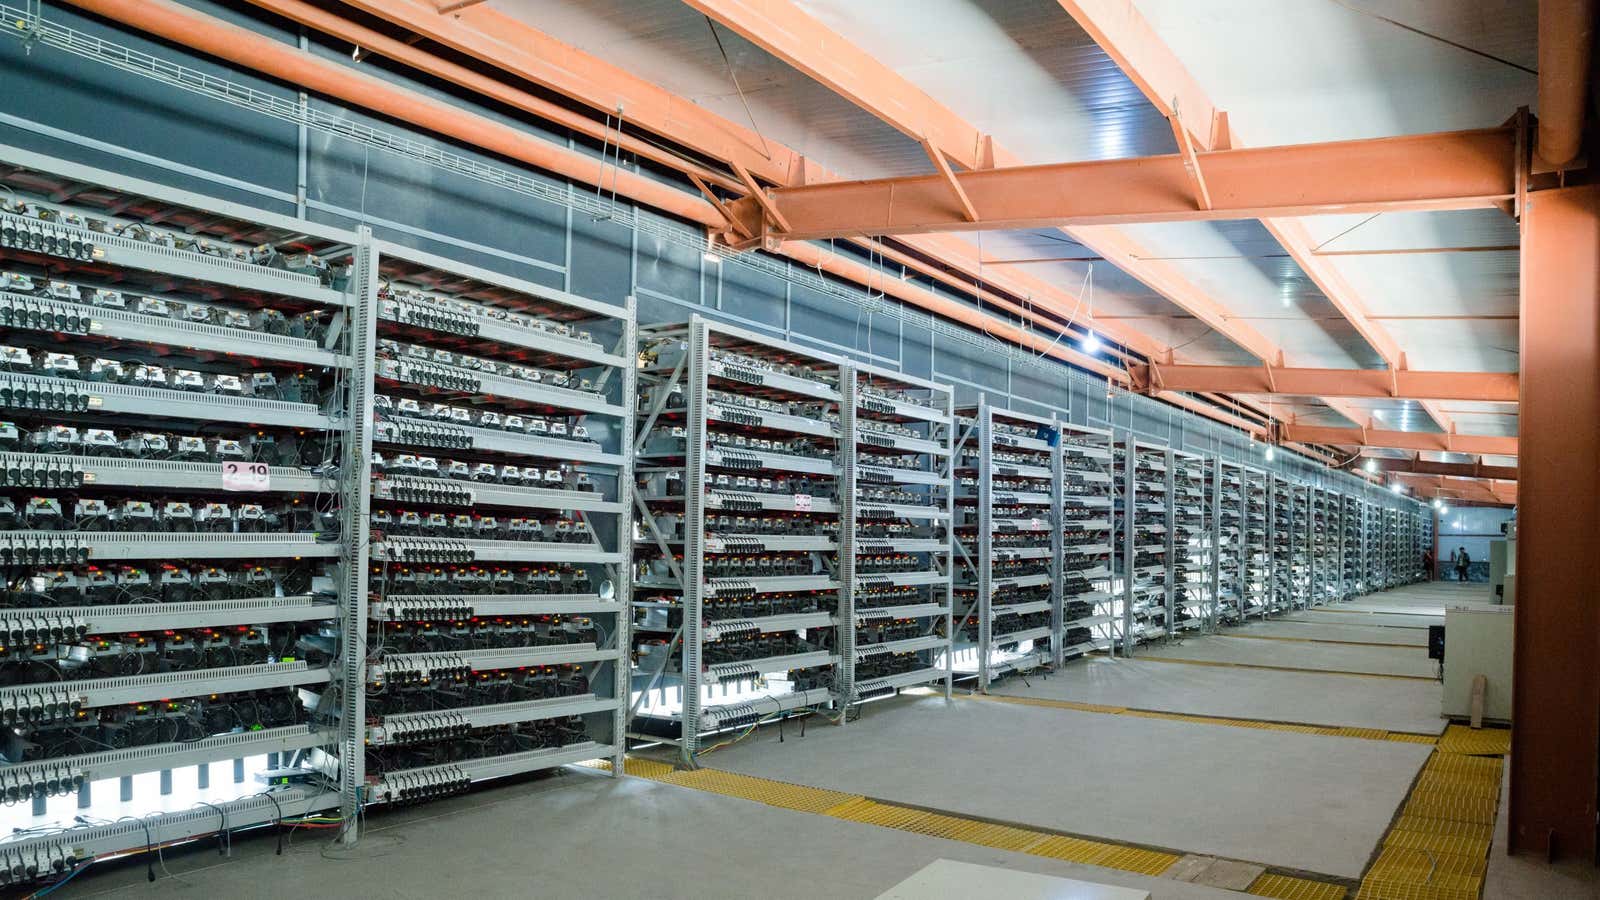 Major competition is coming for existing bitcoin miners.